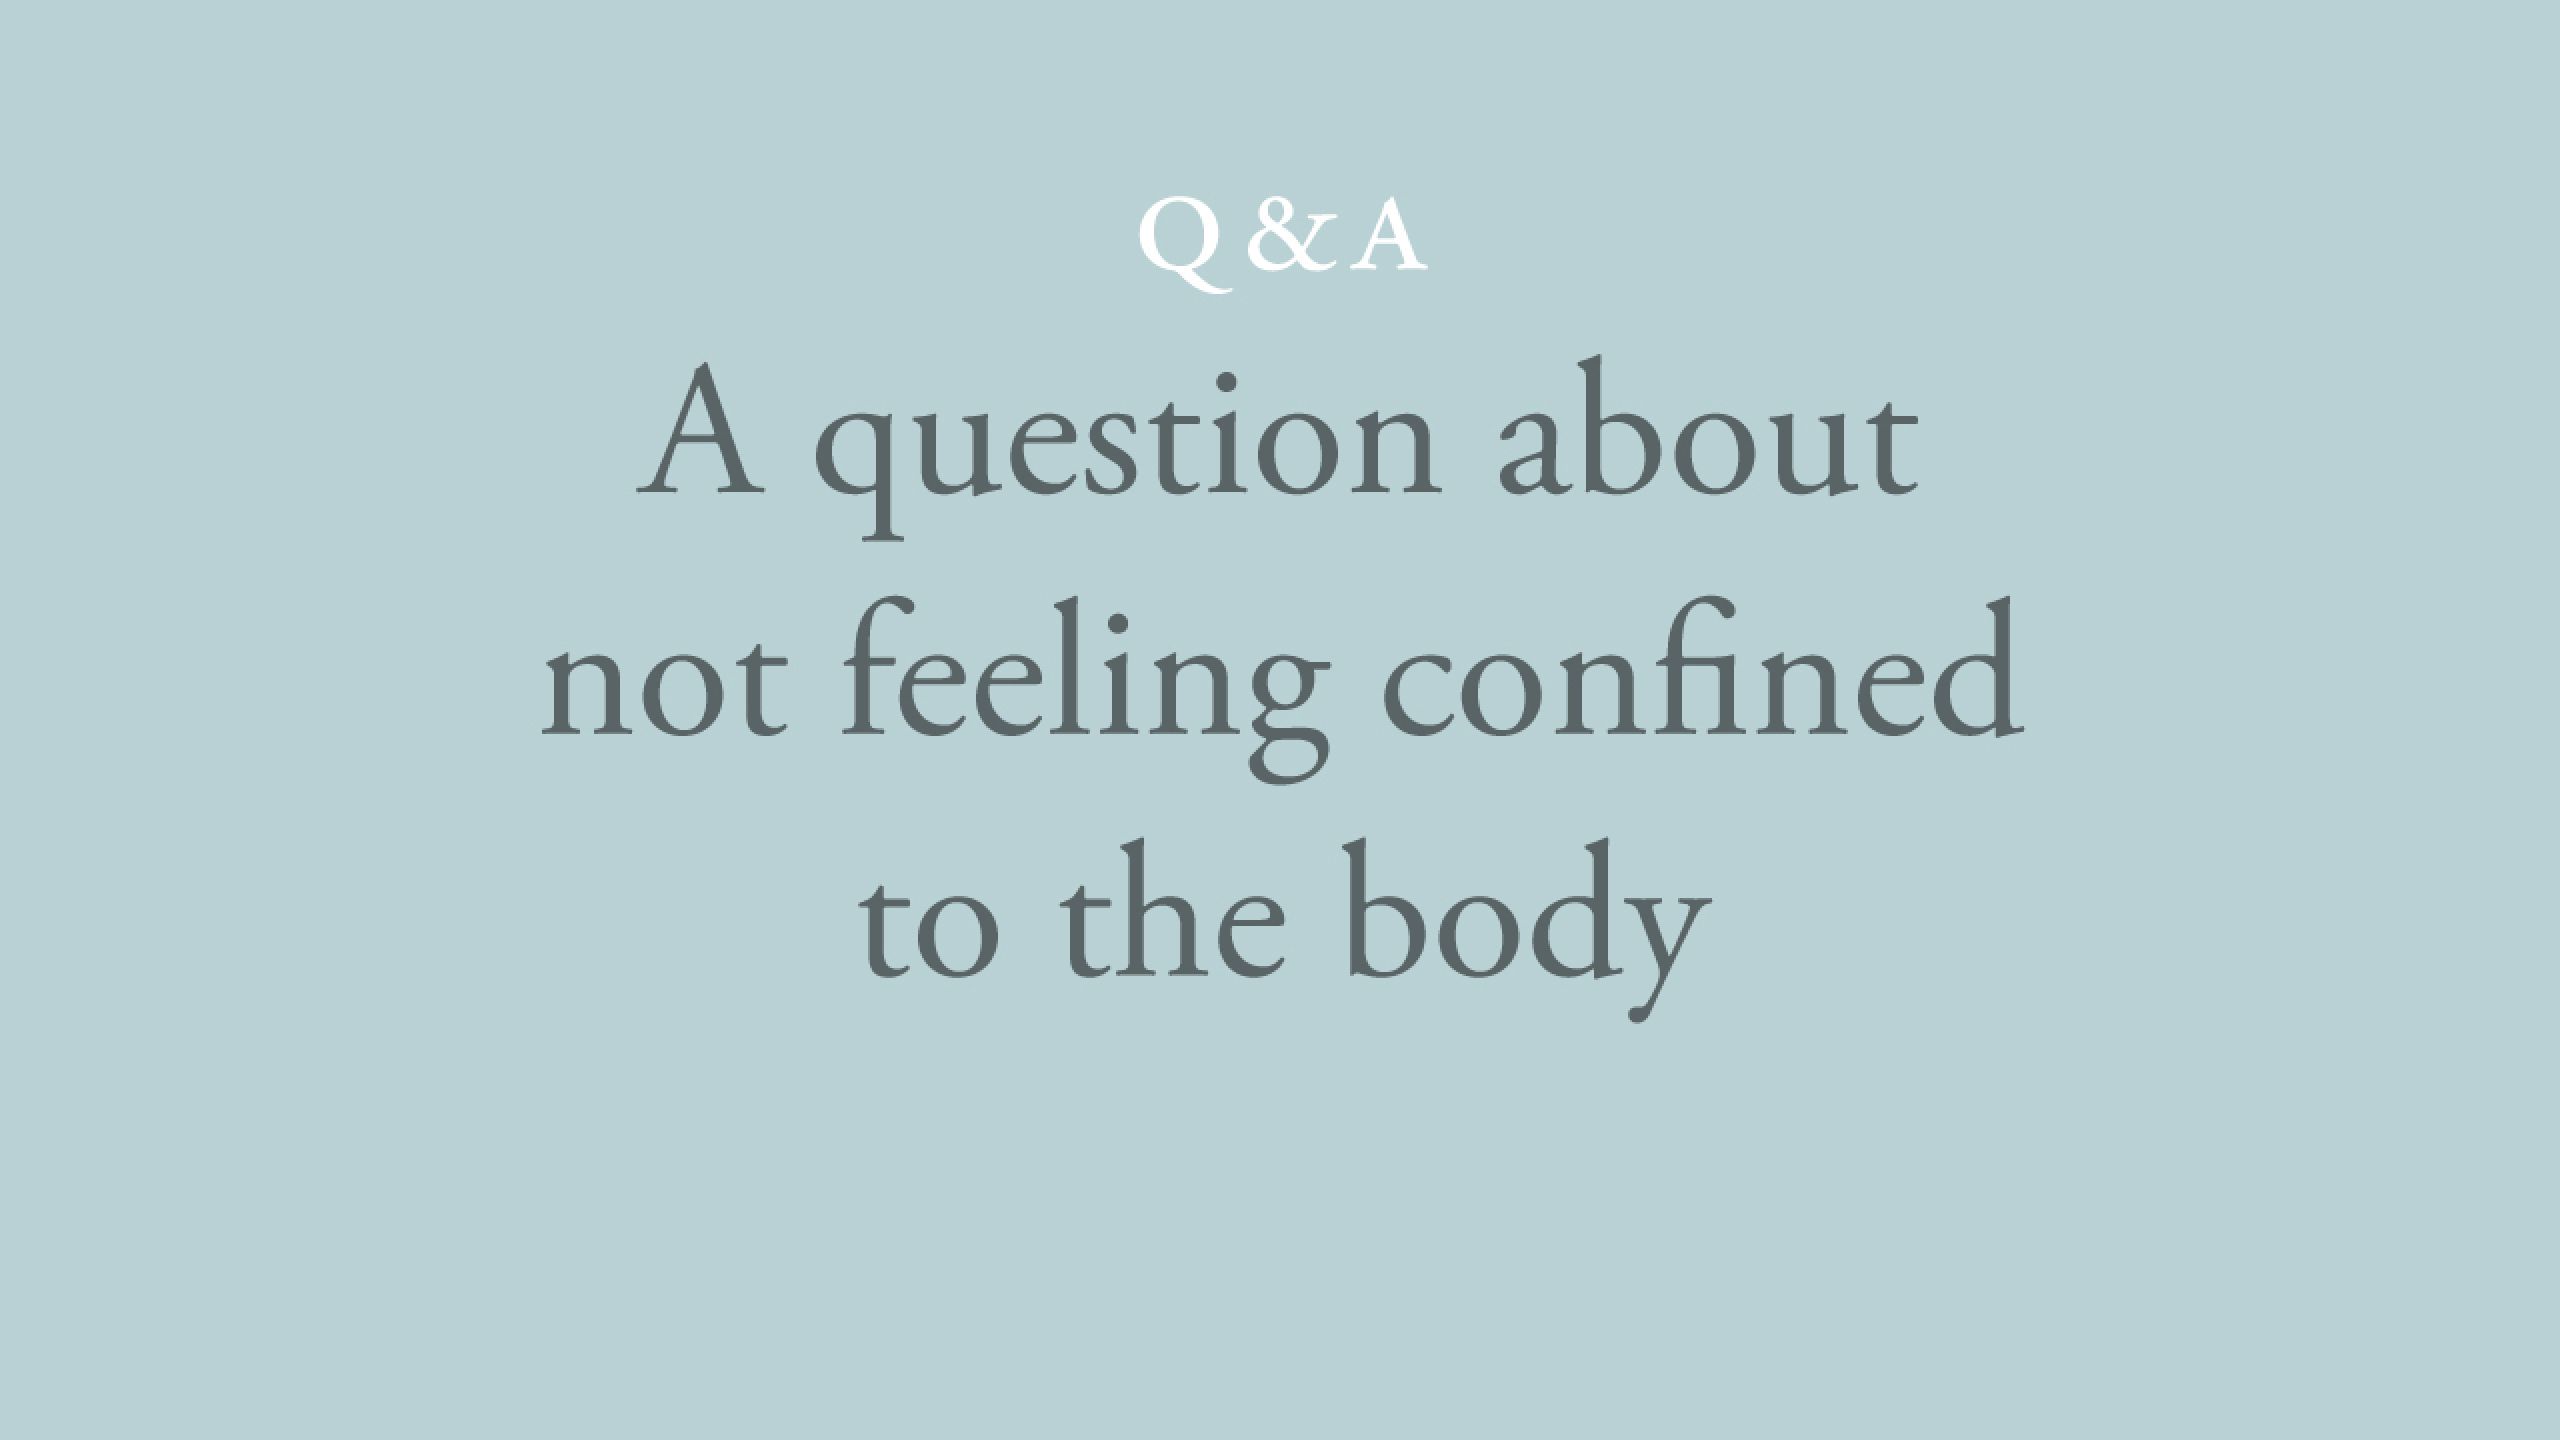 Is the aim to not feel confined to the body?